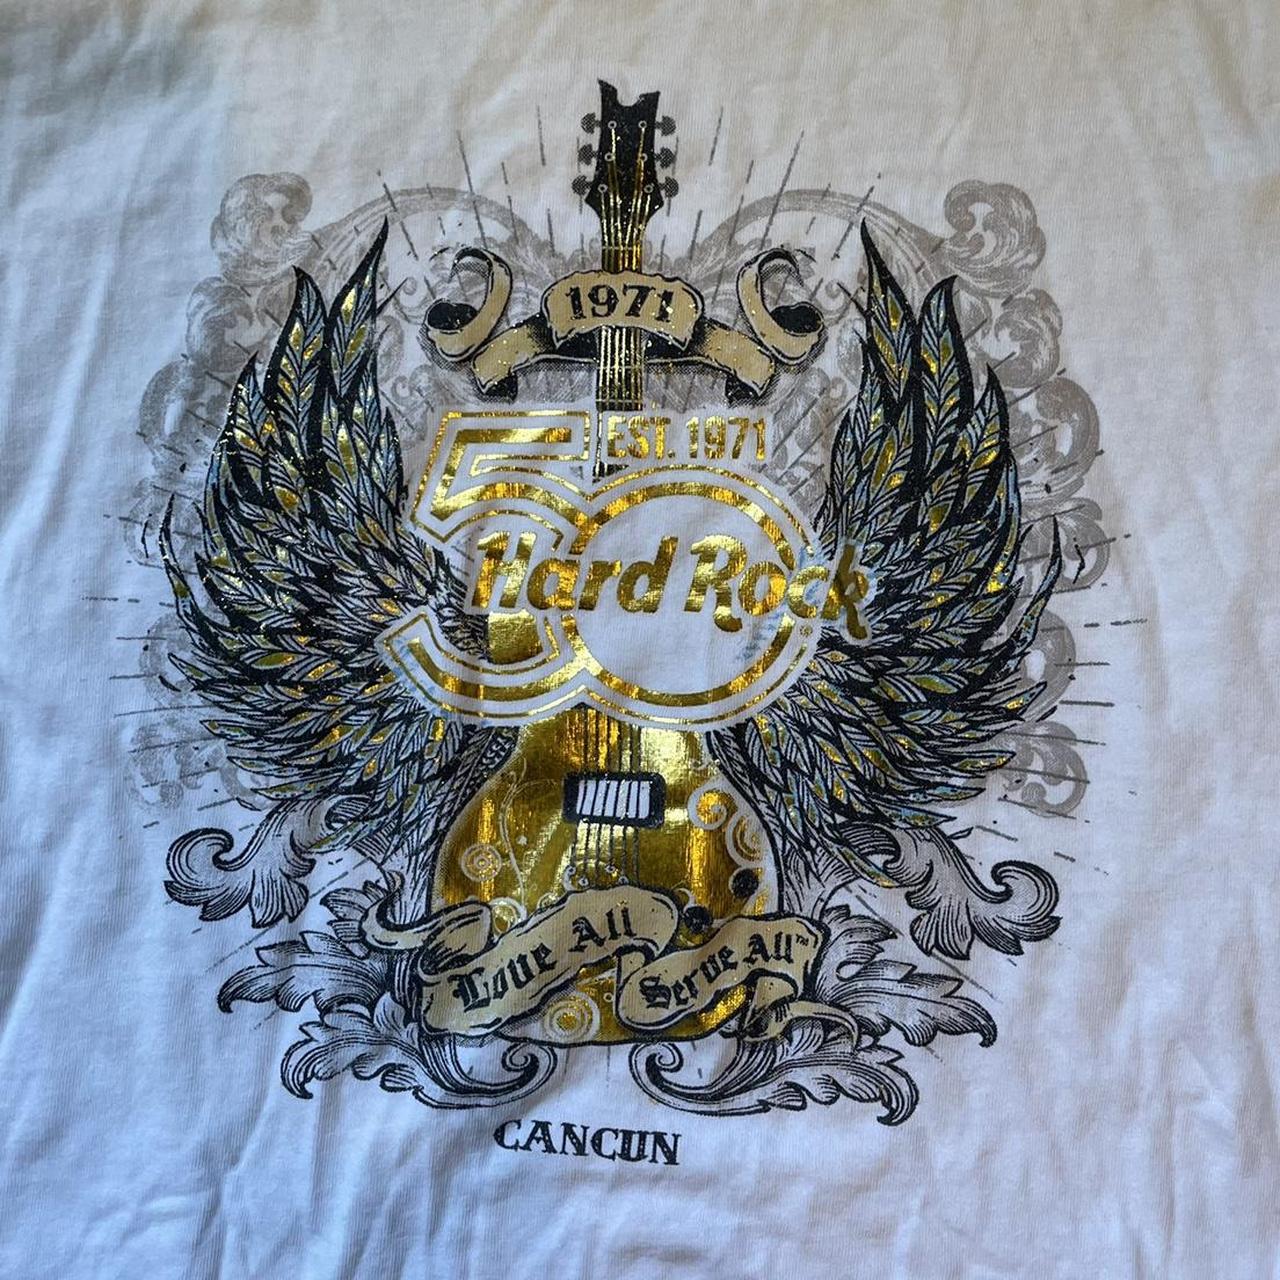 Product Image 2 - hard rock cafe graphic tee
from